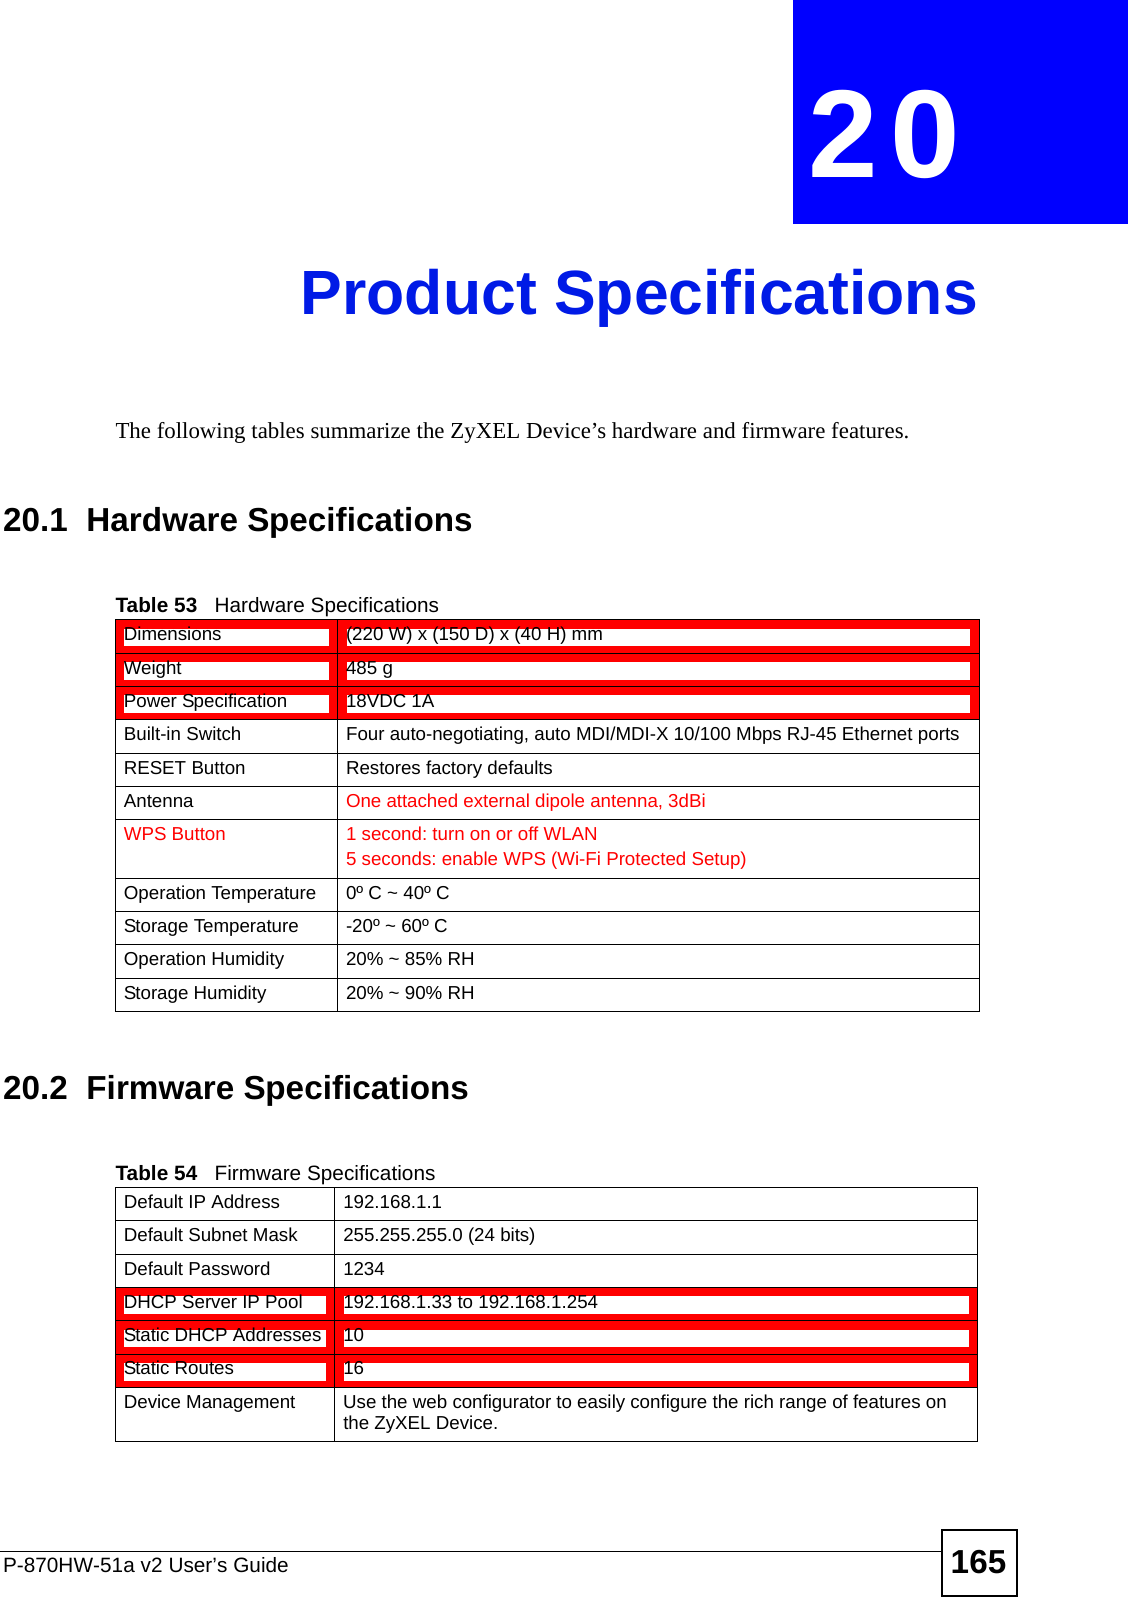 P-870HW-51a v2 User’s Guide 165CHAPTER  20 Product SpecificationsThe following tables summarize the ZyXEL Device’s hardware and firmware features.20.1  Hardware Specifications20.2  Firmware SpecificationsTable 53   Hardware SpecificationsDimensions (220 W) x (150 D) x (40 H) mmWeight 485 gPower Specification 18VDC 1ABuilt-in Switch Four auto-negotiating, auto MDI/MDI-X 10/100 Mbps RJ-45 Ethernet portsRESET Button Restores factory defaultsAntenna One attached external dipole antenna, 3dBiWPS Button 1 second: turn on or off WLAN5 seconds: enable WPS (Wi-Fi Protected Setup)Operation Temperature 0º C ~ 40º CStorage Temperature -20º ~ 60º COperation Humidity 20% ~ 85% RHStorage Humidity 20% ~ 90% RHTable 54   Firmware Specifications Default IP Address 192.168.1.1Default Subnet Mask 255.255.255.0 (24 bits)Default Password 1234DHCP Server IP Pool 192.168.1.33 to 192.168.1.254Static DHCP Addresses 10Static Routes 16Device Management Use the web configurator to easily configure the rich range of features on the ZyXEL Device.